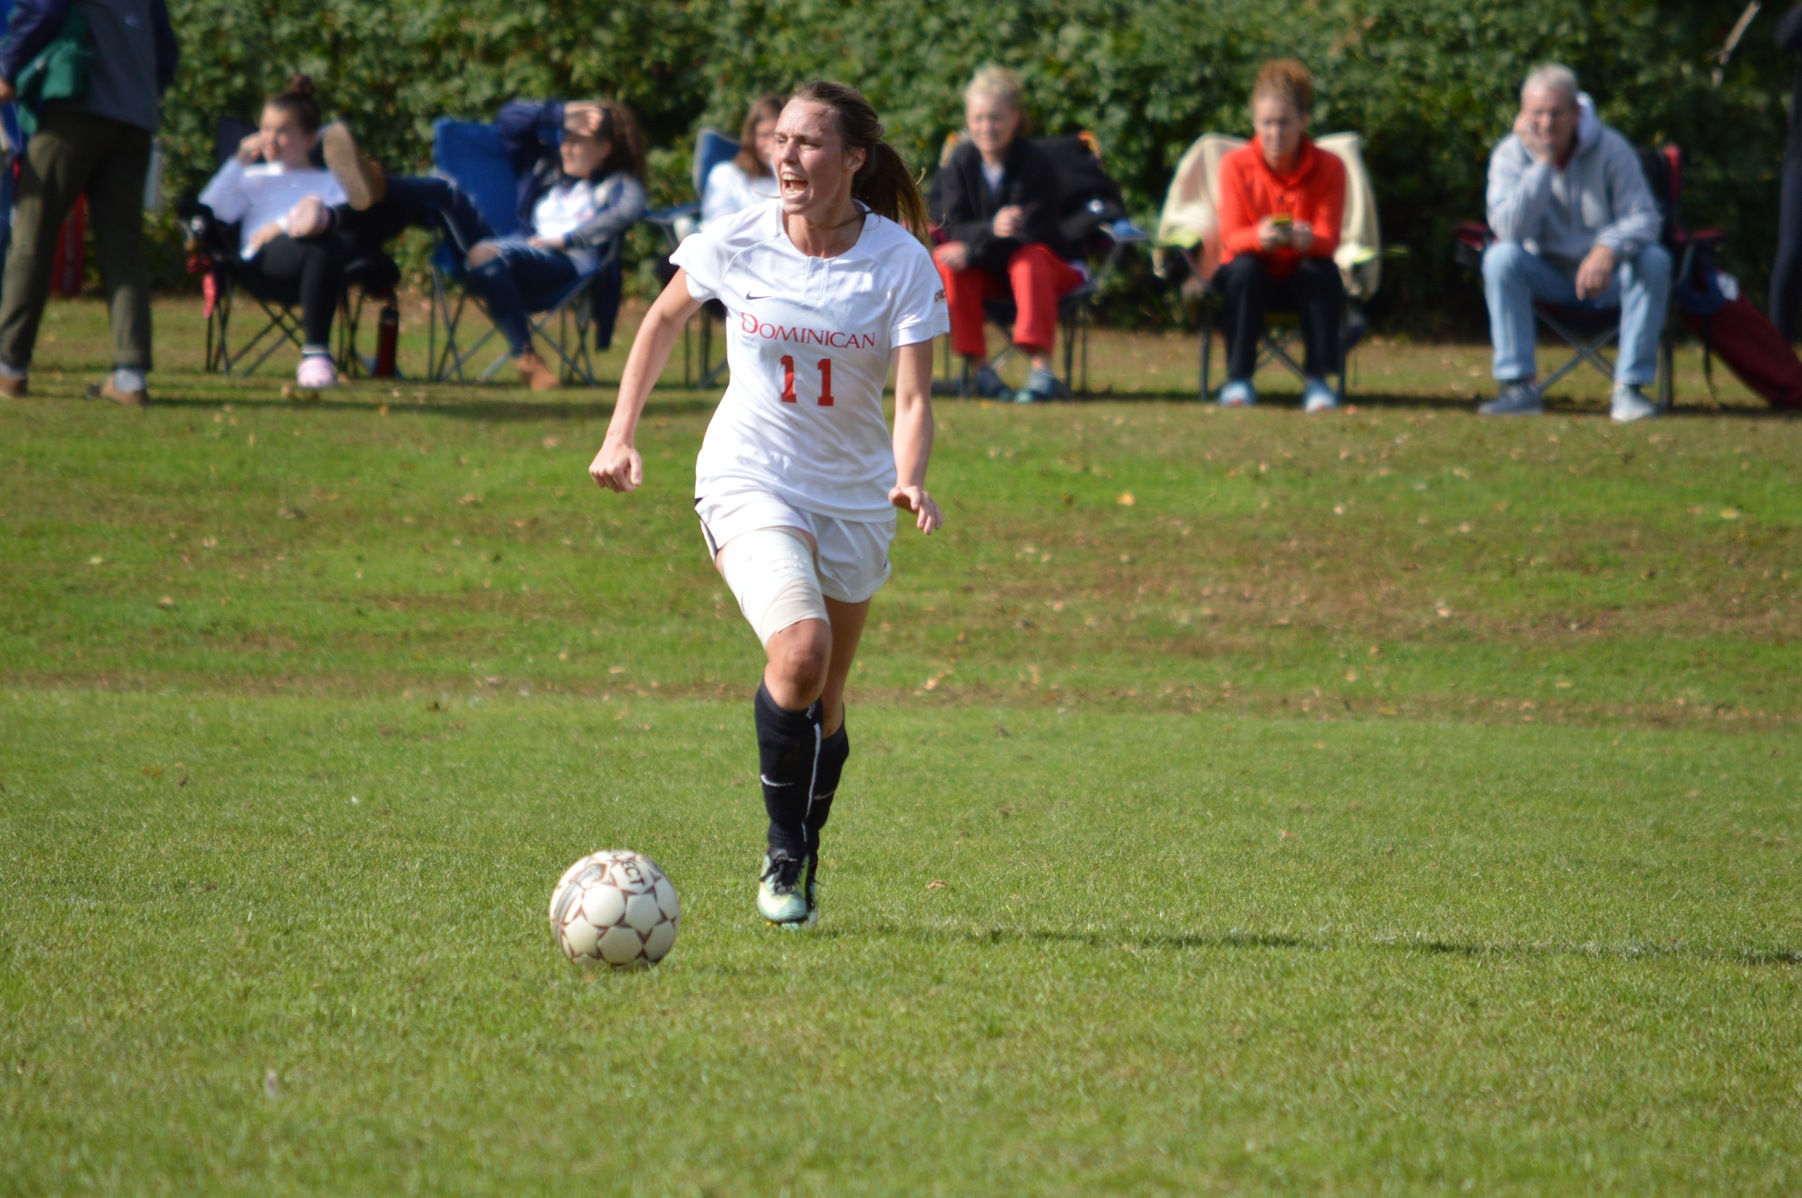 LADY CHARGERS CONCLUDE REGULAR SEASON WITH LOSS TO QUEENS COLLEGE